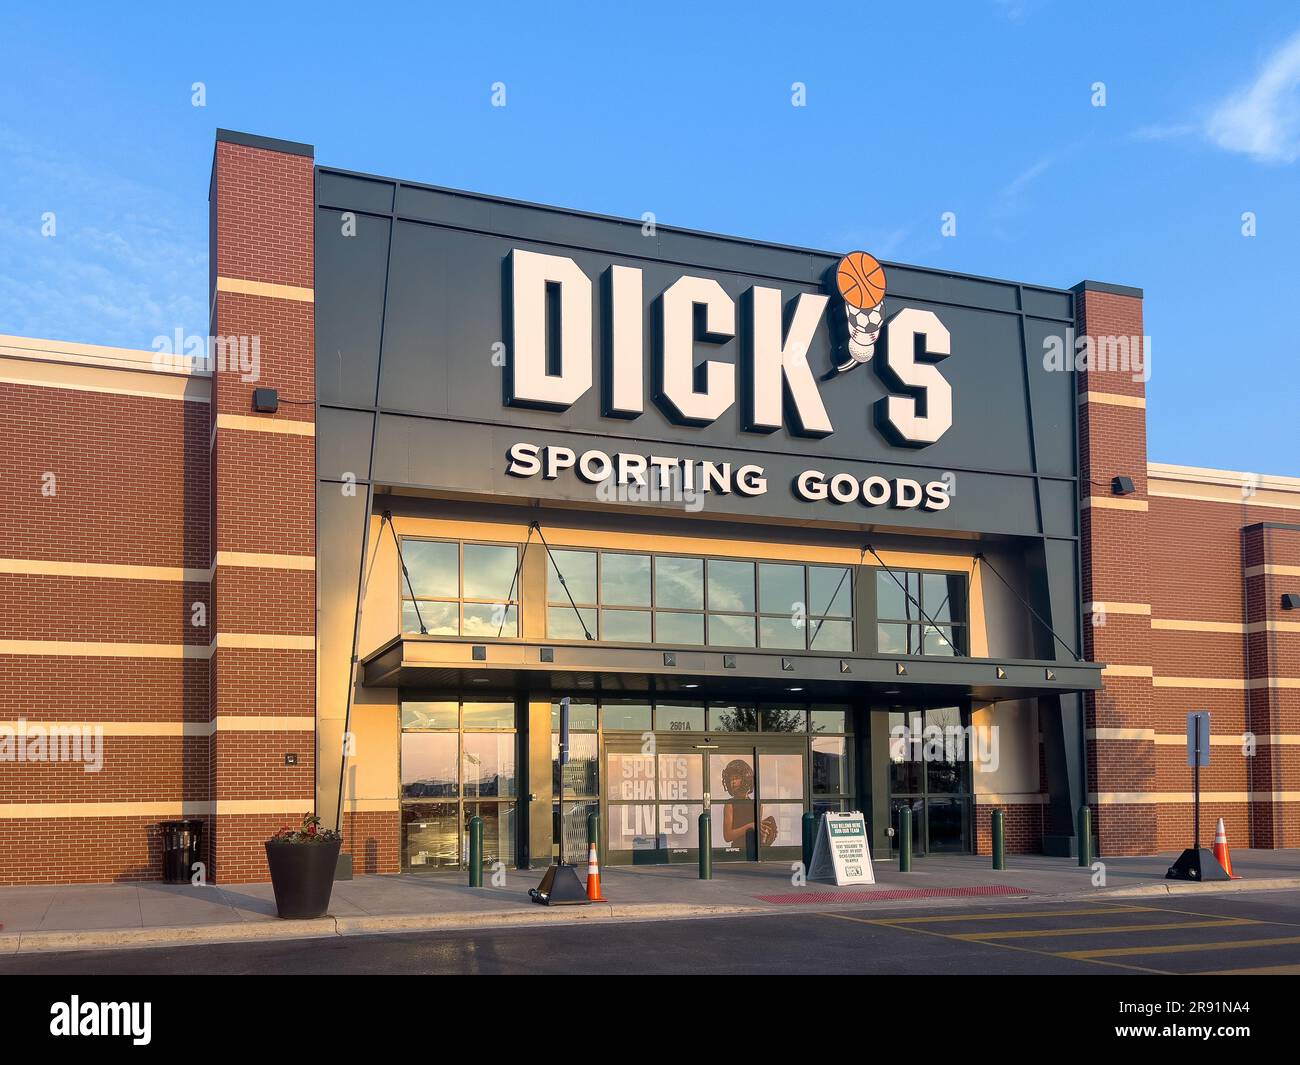 https://c8.alamy.com/comp/2R91NA4/dicks-sporting-goods-store-is-the-largest-american-sporting-goods-store-with-over-800-locations-throughout-the-united-states-2R91NA4.jpg